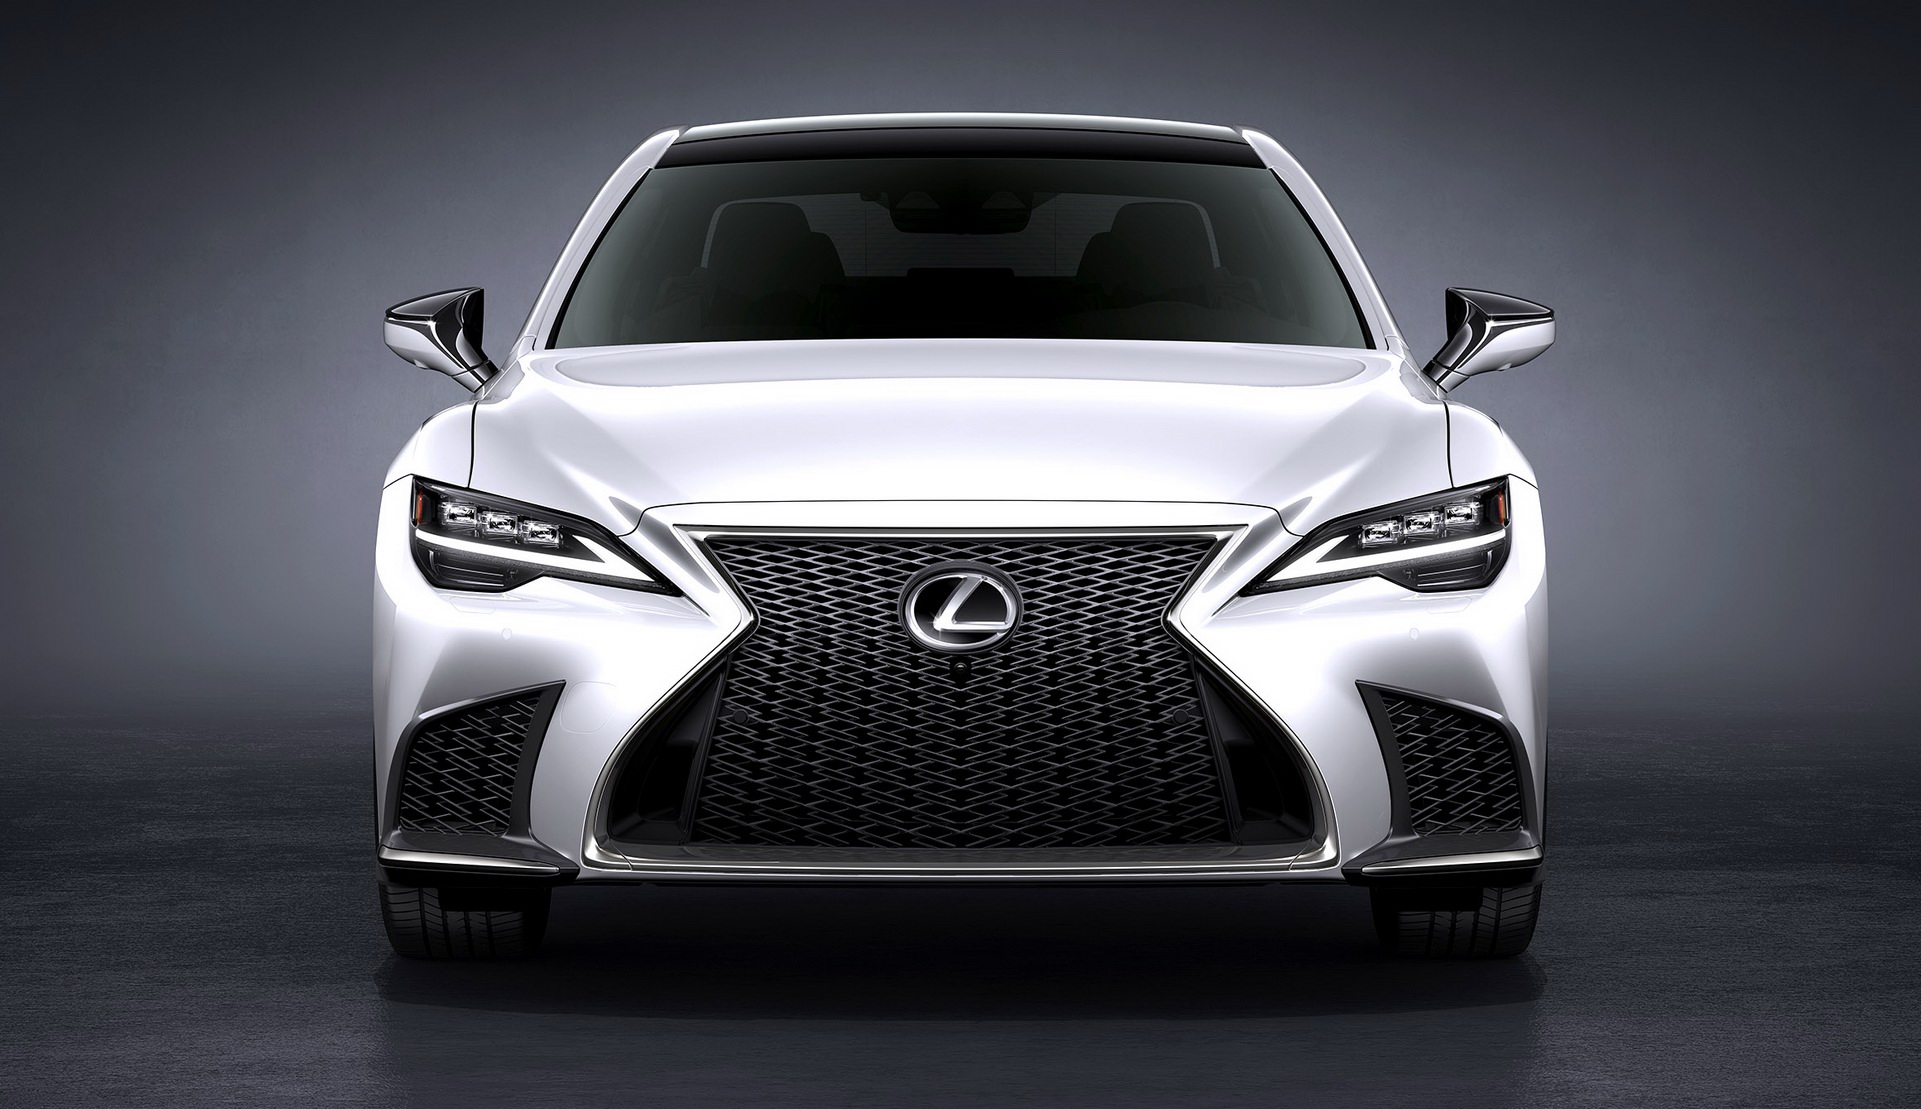 Assimilate Uventet snorkel Lexus Will Tone Down But Won't Abandon Spindle Grille Despite Customers  Saying It's A “Turnoff” | Carscoops